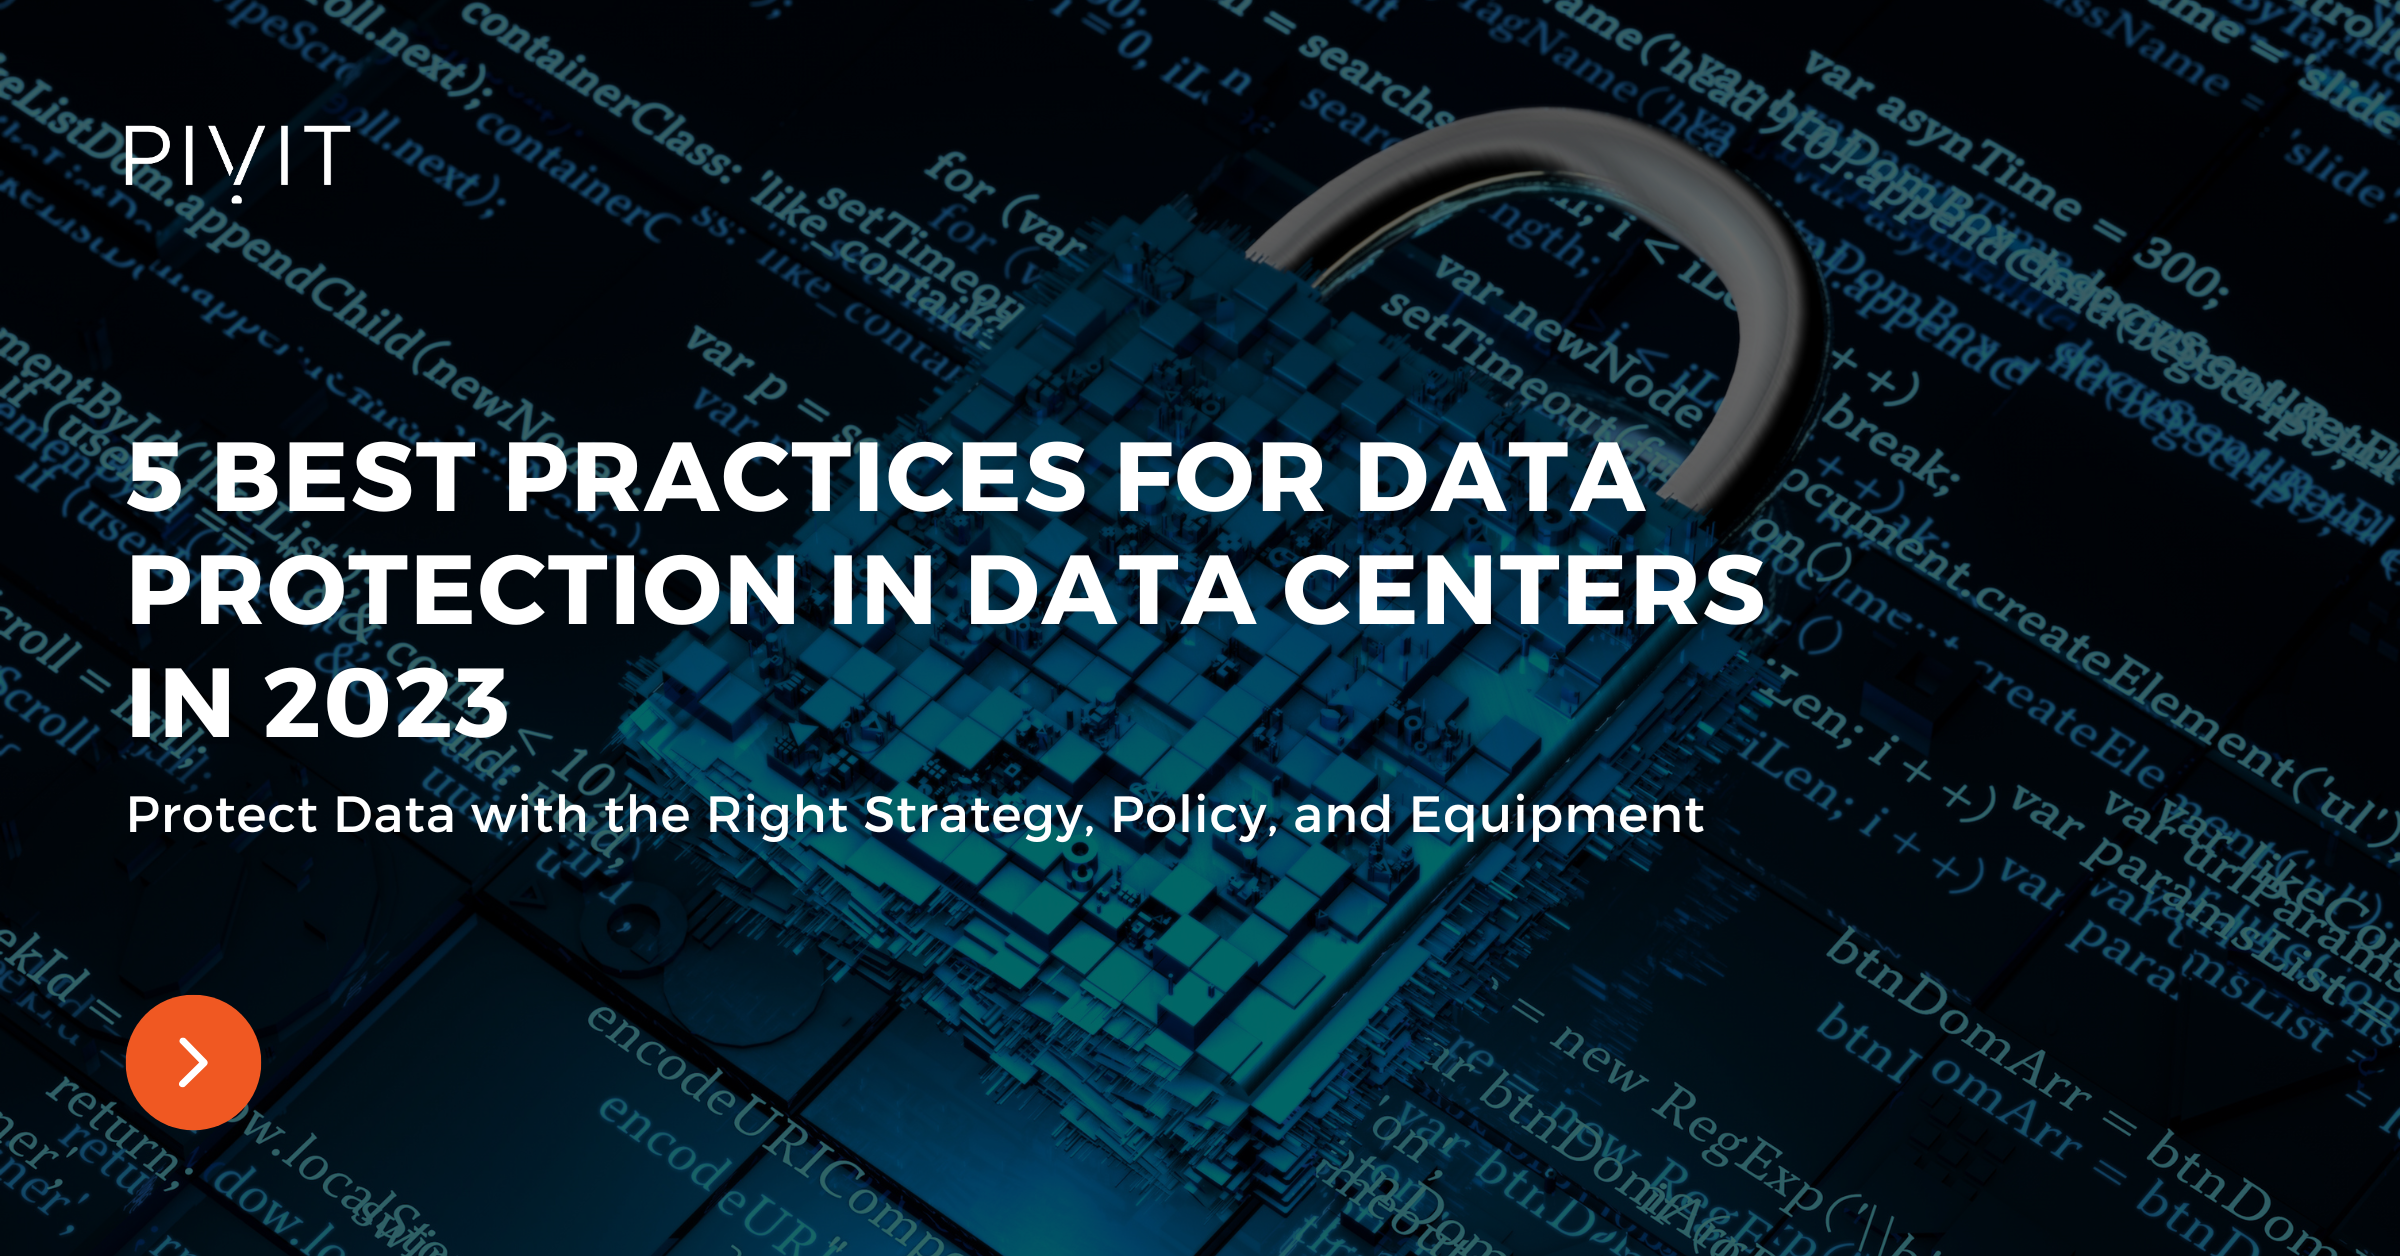 5 Best Practices for Data Protection in Data Centers in 2023